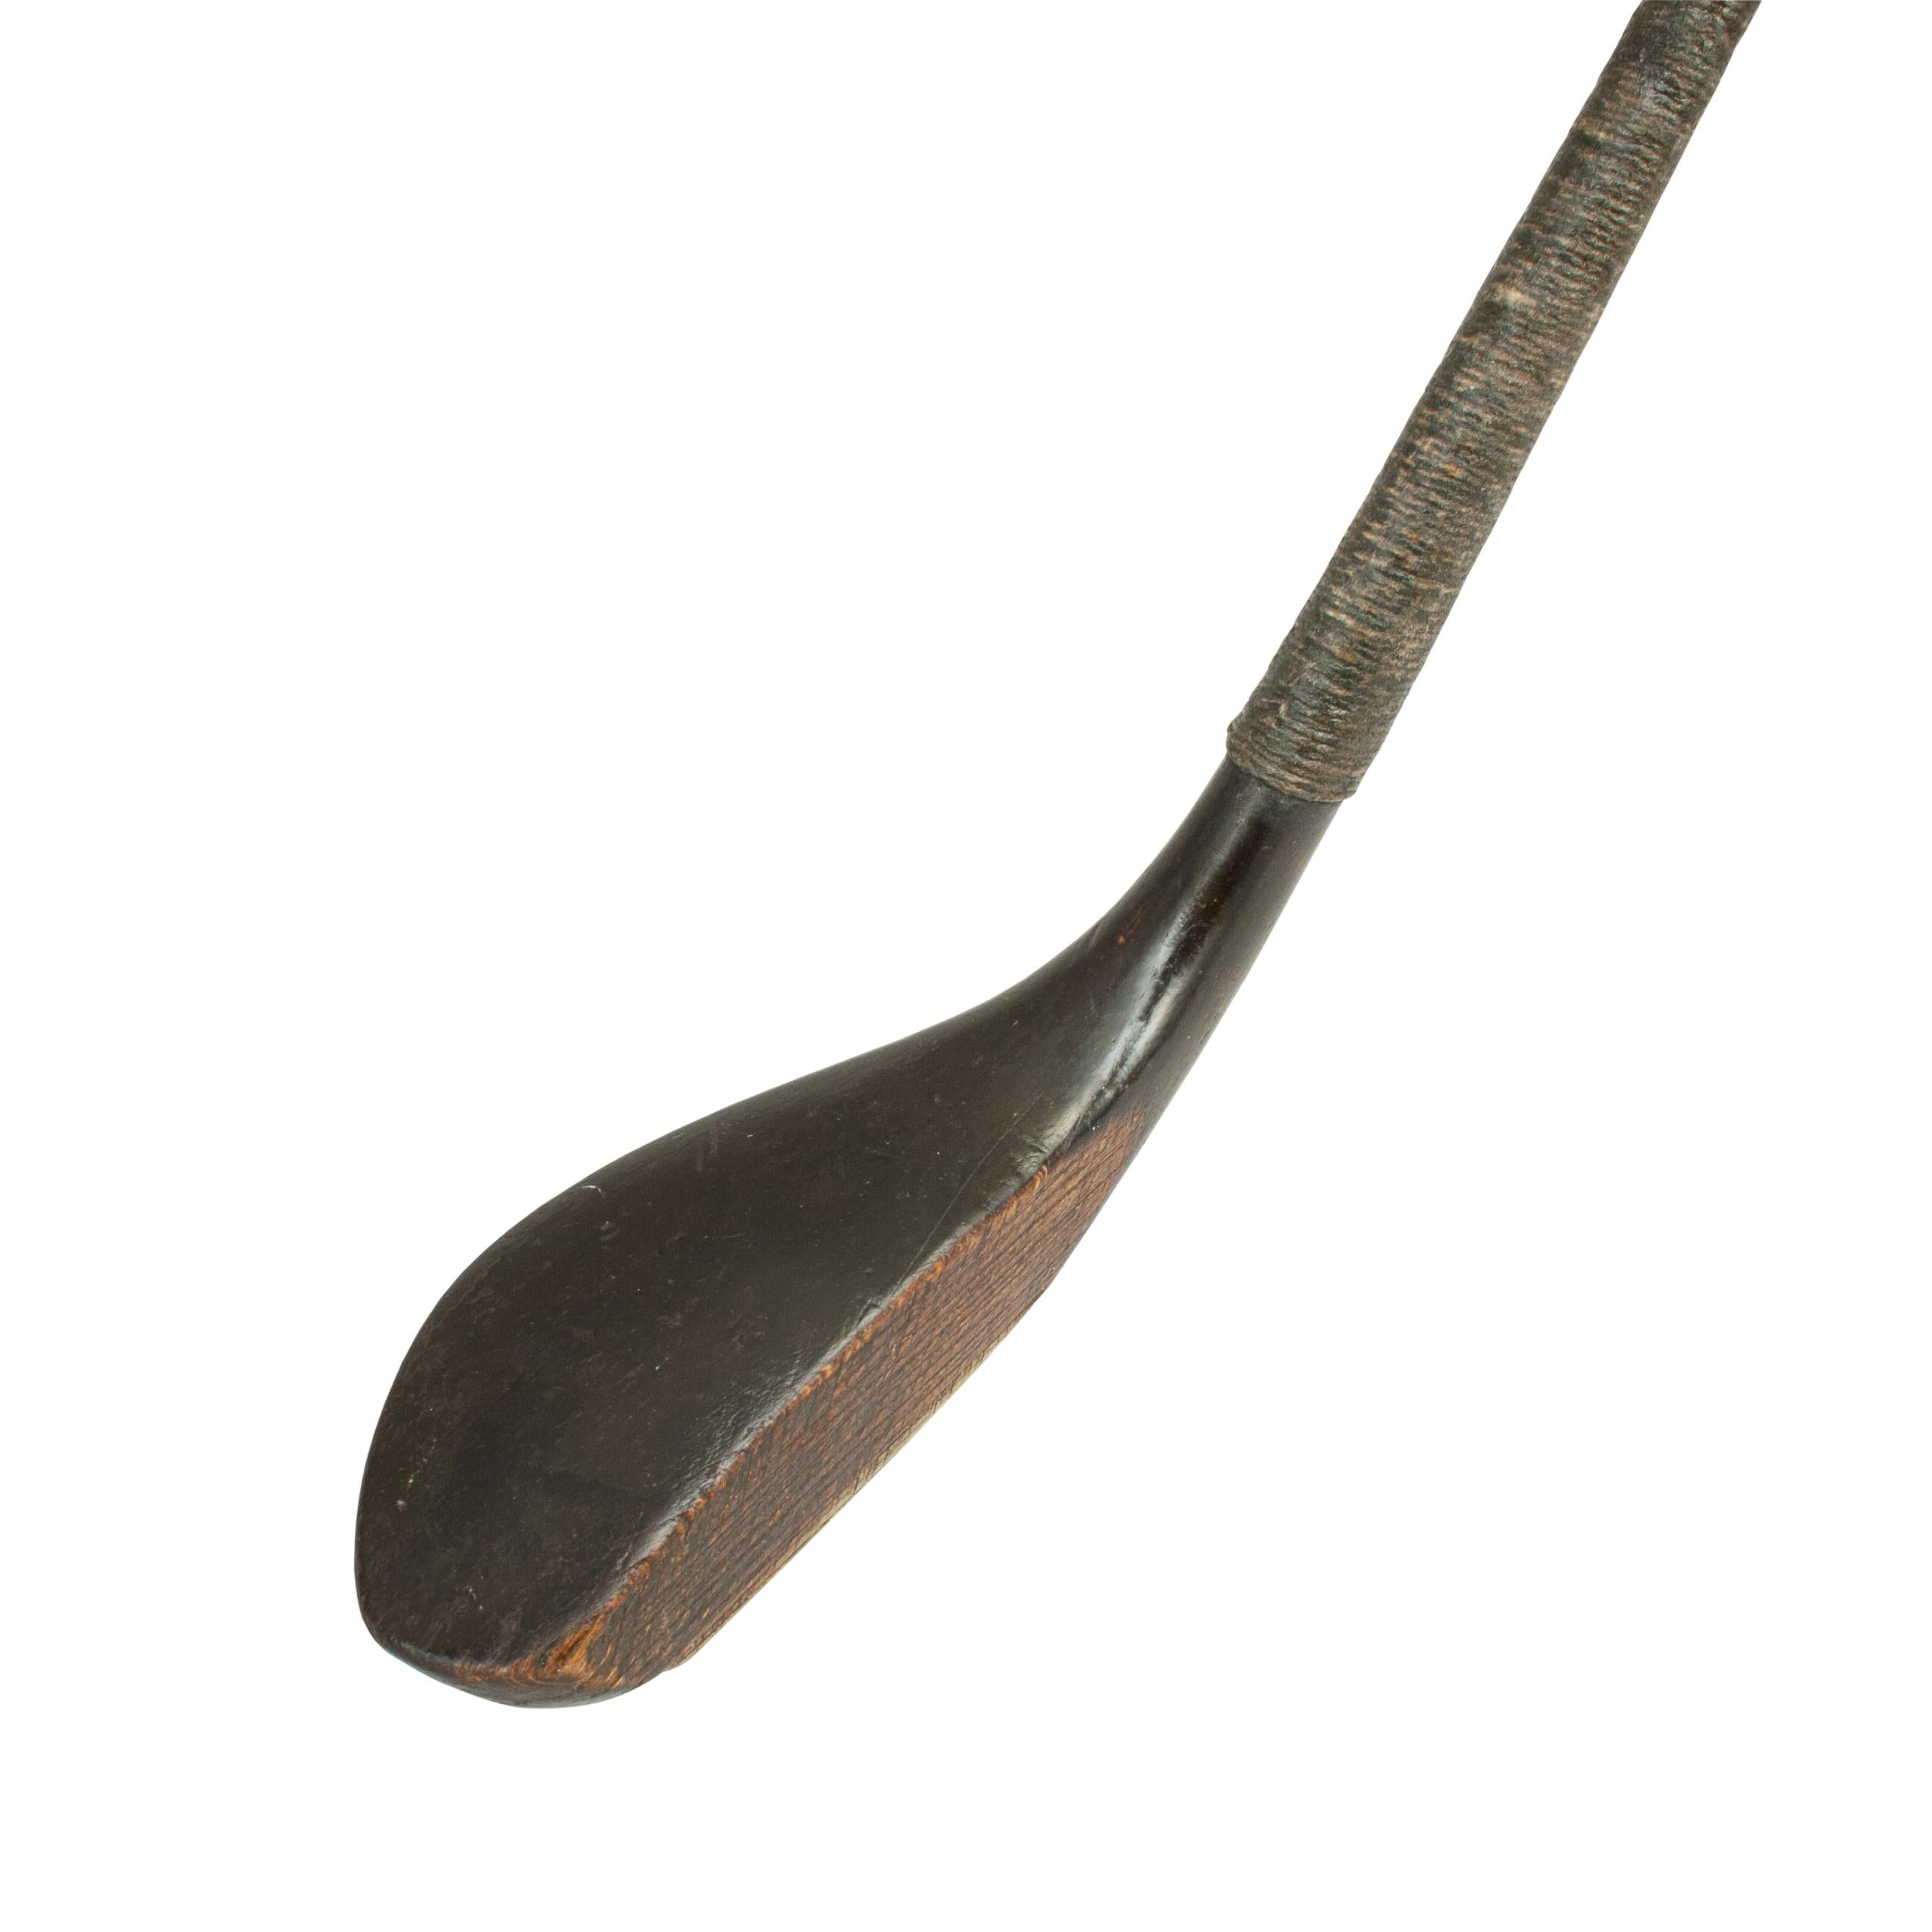 Long Nose Golf Club by Mitchell.
A superb long nosed golf club, the polished blackened beech wood head with faint name stamp, most probably 'MITCHELL'. This refers to David Mitchell, a club maker from St. Andrews and Carnoustie, and not the